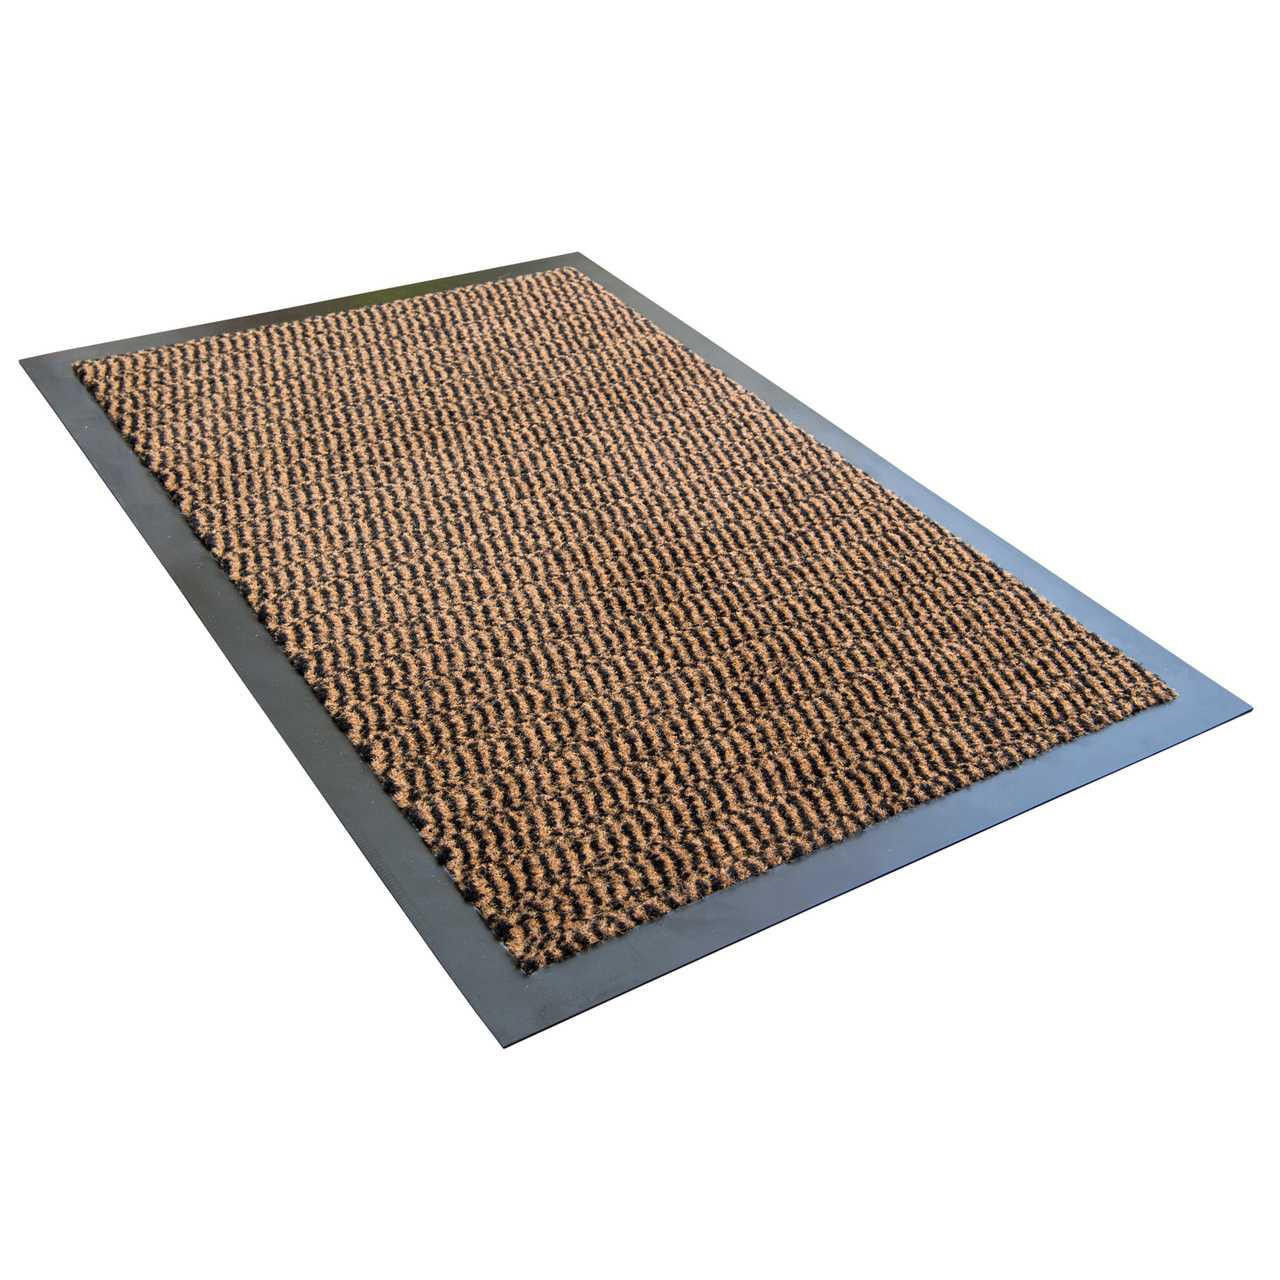 https://cdn11.bigcommerce.com/s-fjwps1jbkv/images/stencil/1280x1280/products/145/3904/ultralux-indoor-entrance-mat-or-polypropylene-fibers-and-anti-slip-vinyl-backed-entry-rug-doormat-or-brown__42817.1689079065.jpg?c=2?imbypass=on